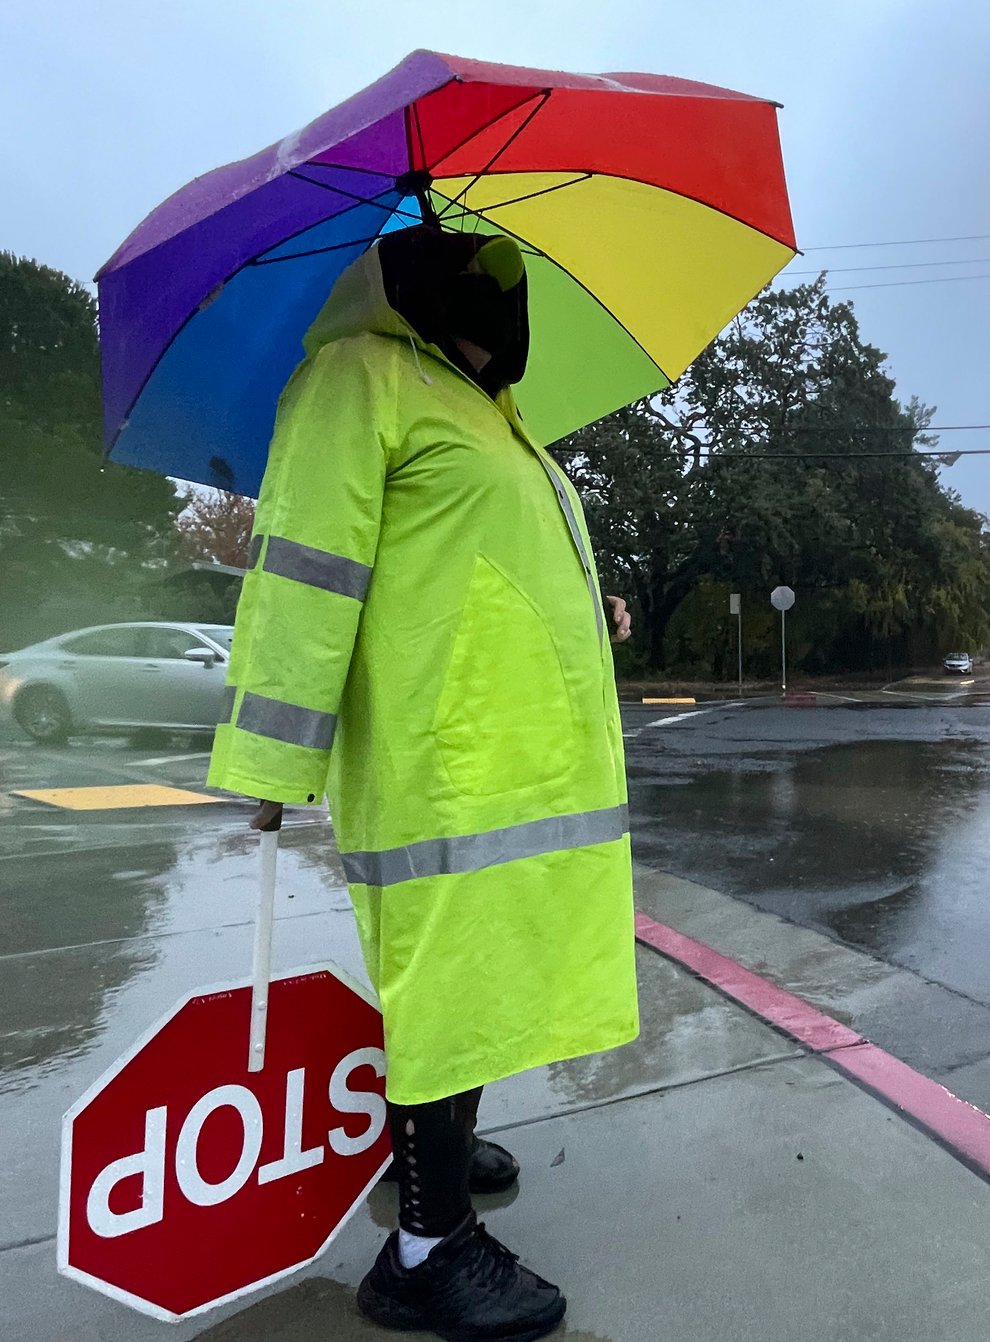 Forecasters have warned an incoming storm could bring record-breaking amounts of rain to northern California (Sherry LaVars/Marin Independent Journal via AP)